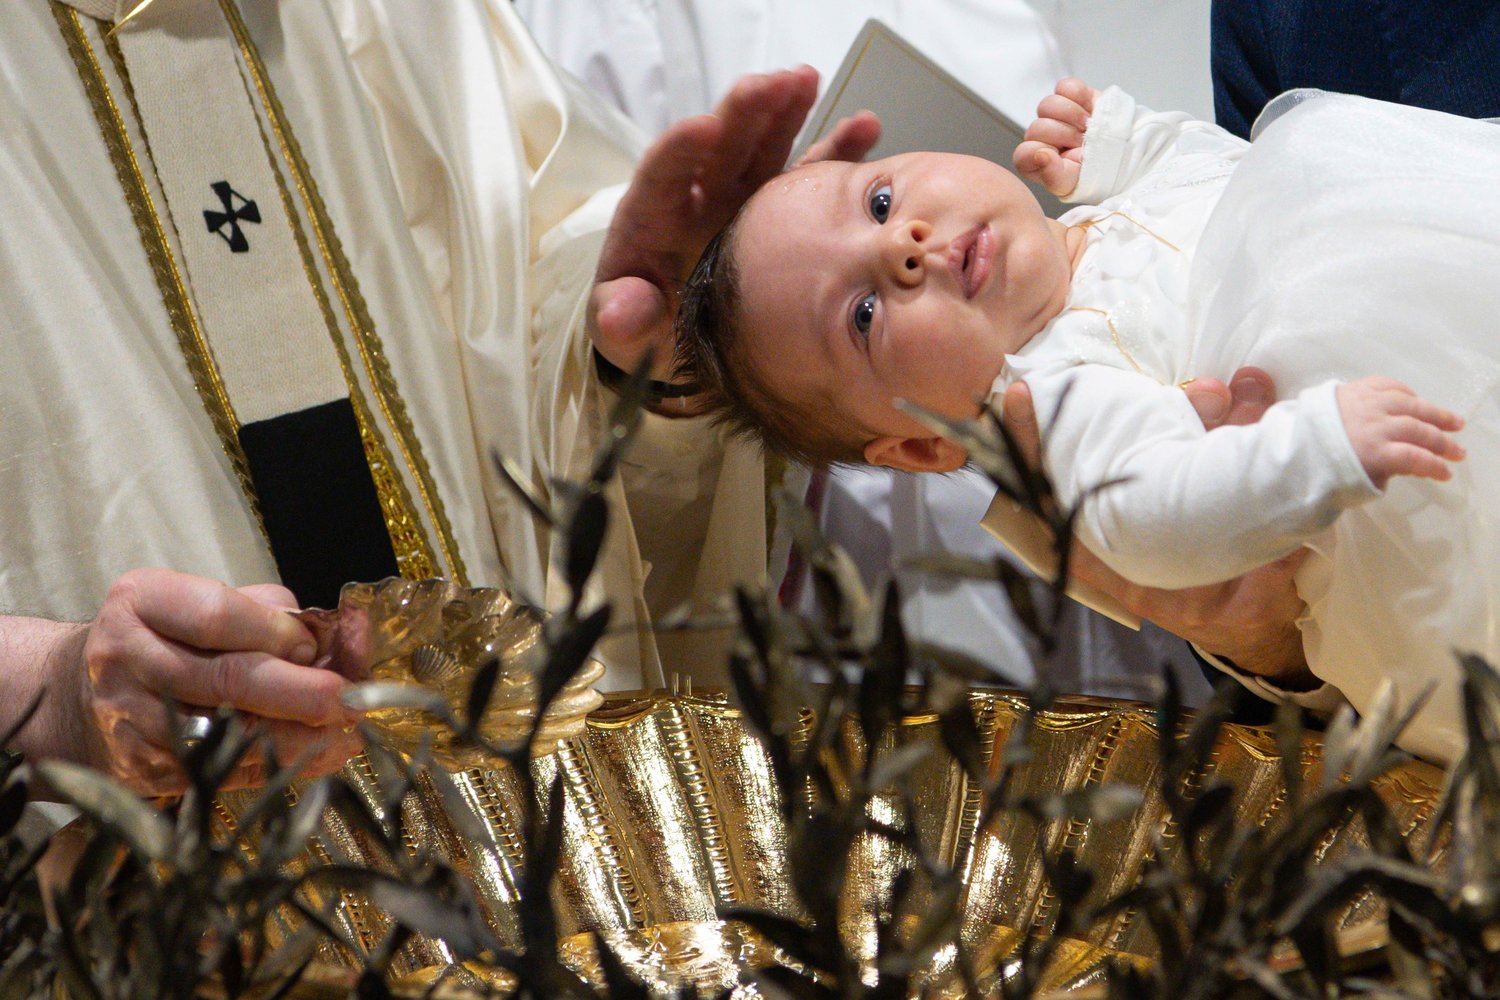 Pope Francis baptizes a baby as he celebrates Mass marking the feast of the Baptism of the Lord in the Sistine Chapel at the Vatican Jan. 9. The pope baptized 16 infants.